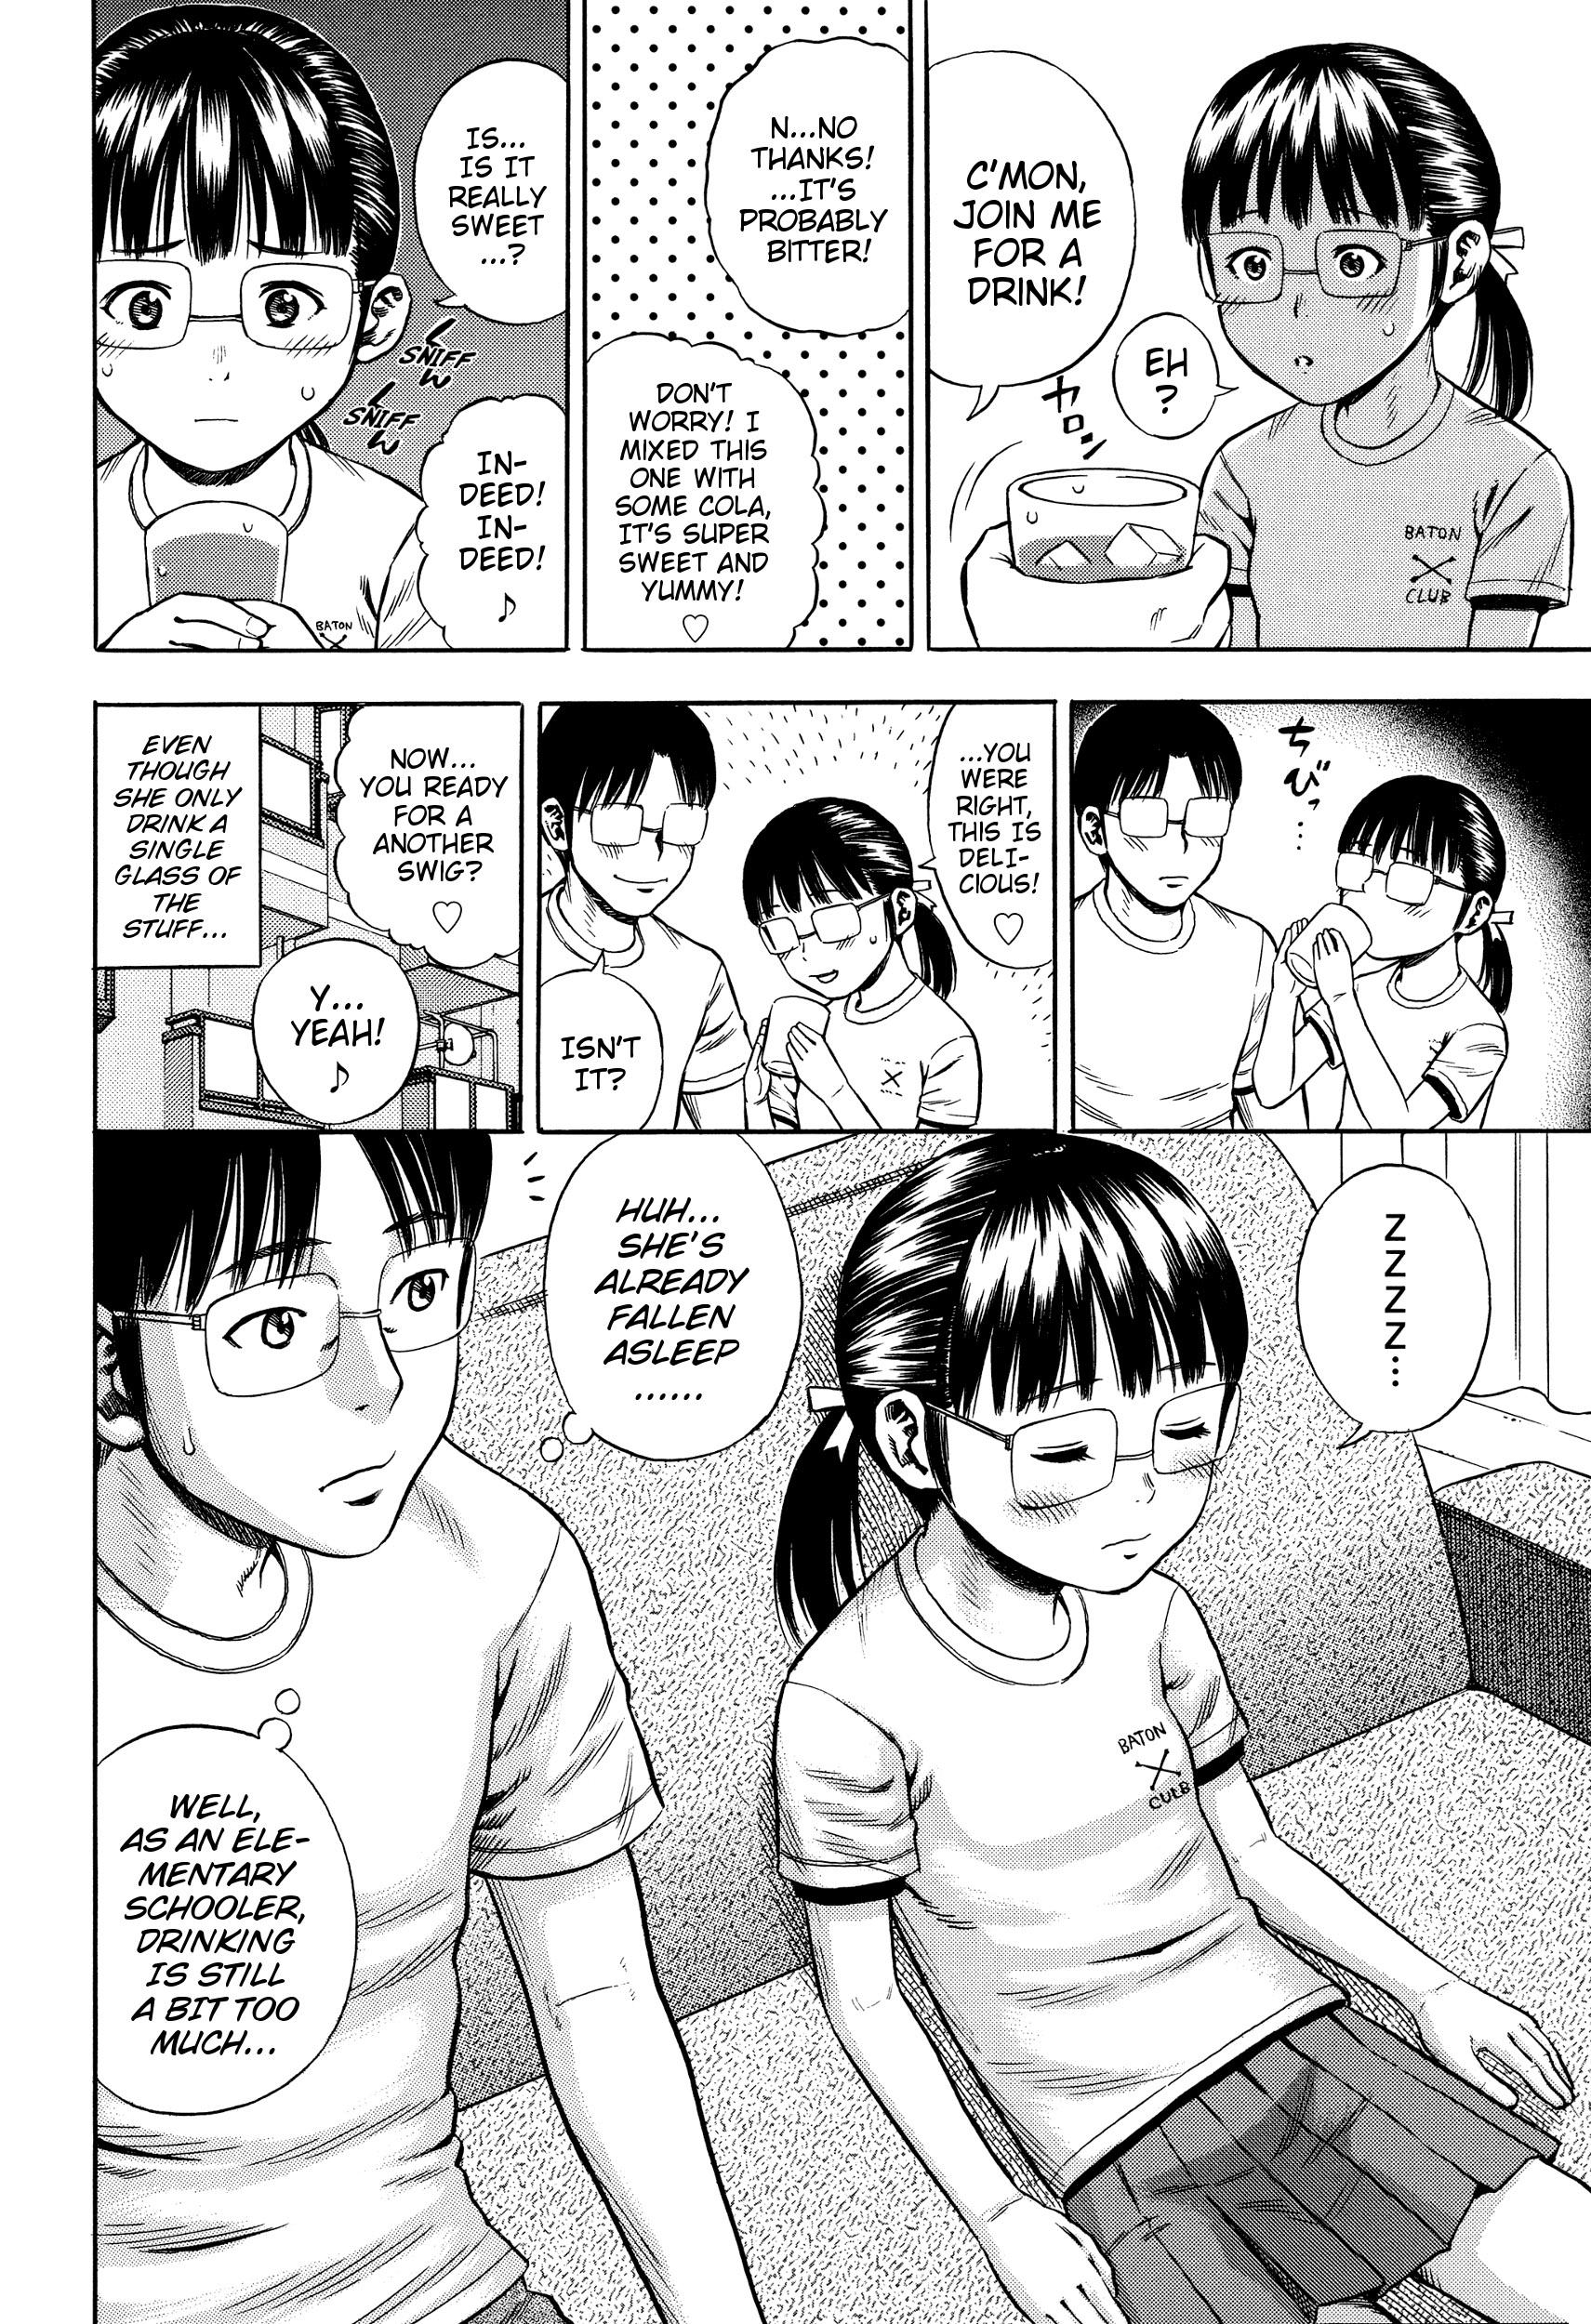 Small Tits Porn Uchi no Imouto ga Warito Kawaii | My Little Sister Is Relatively Cute Amateur Xxx - Page 4